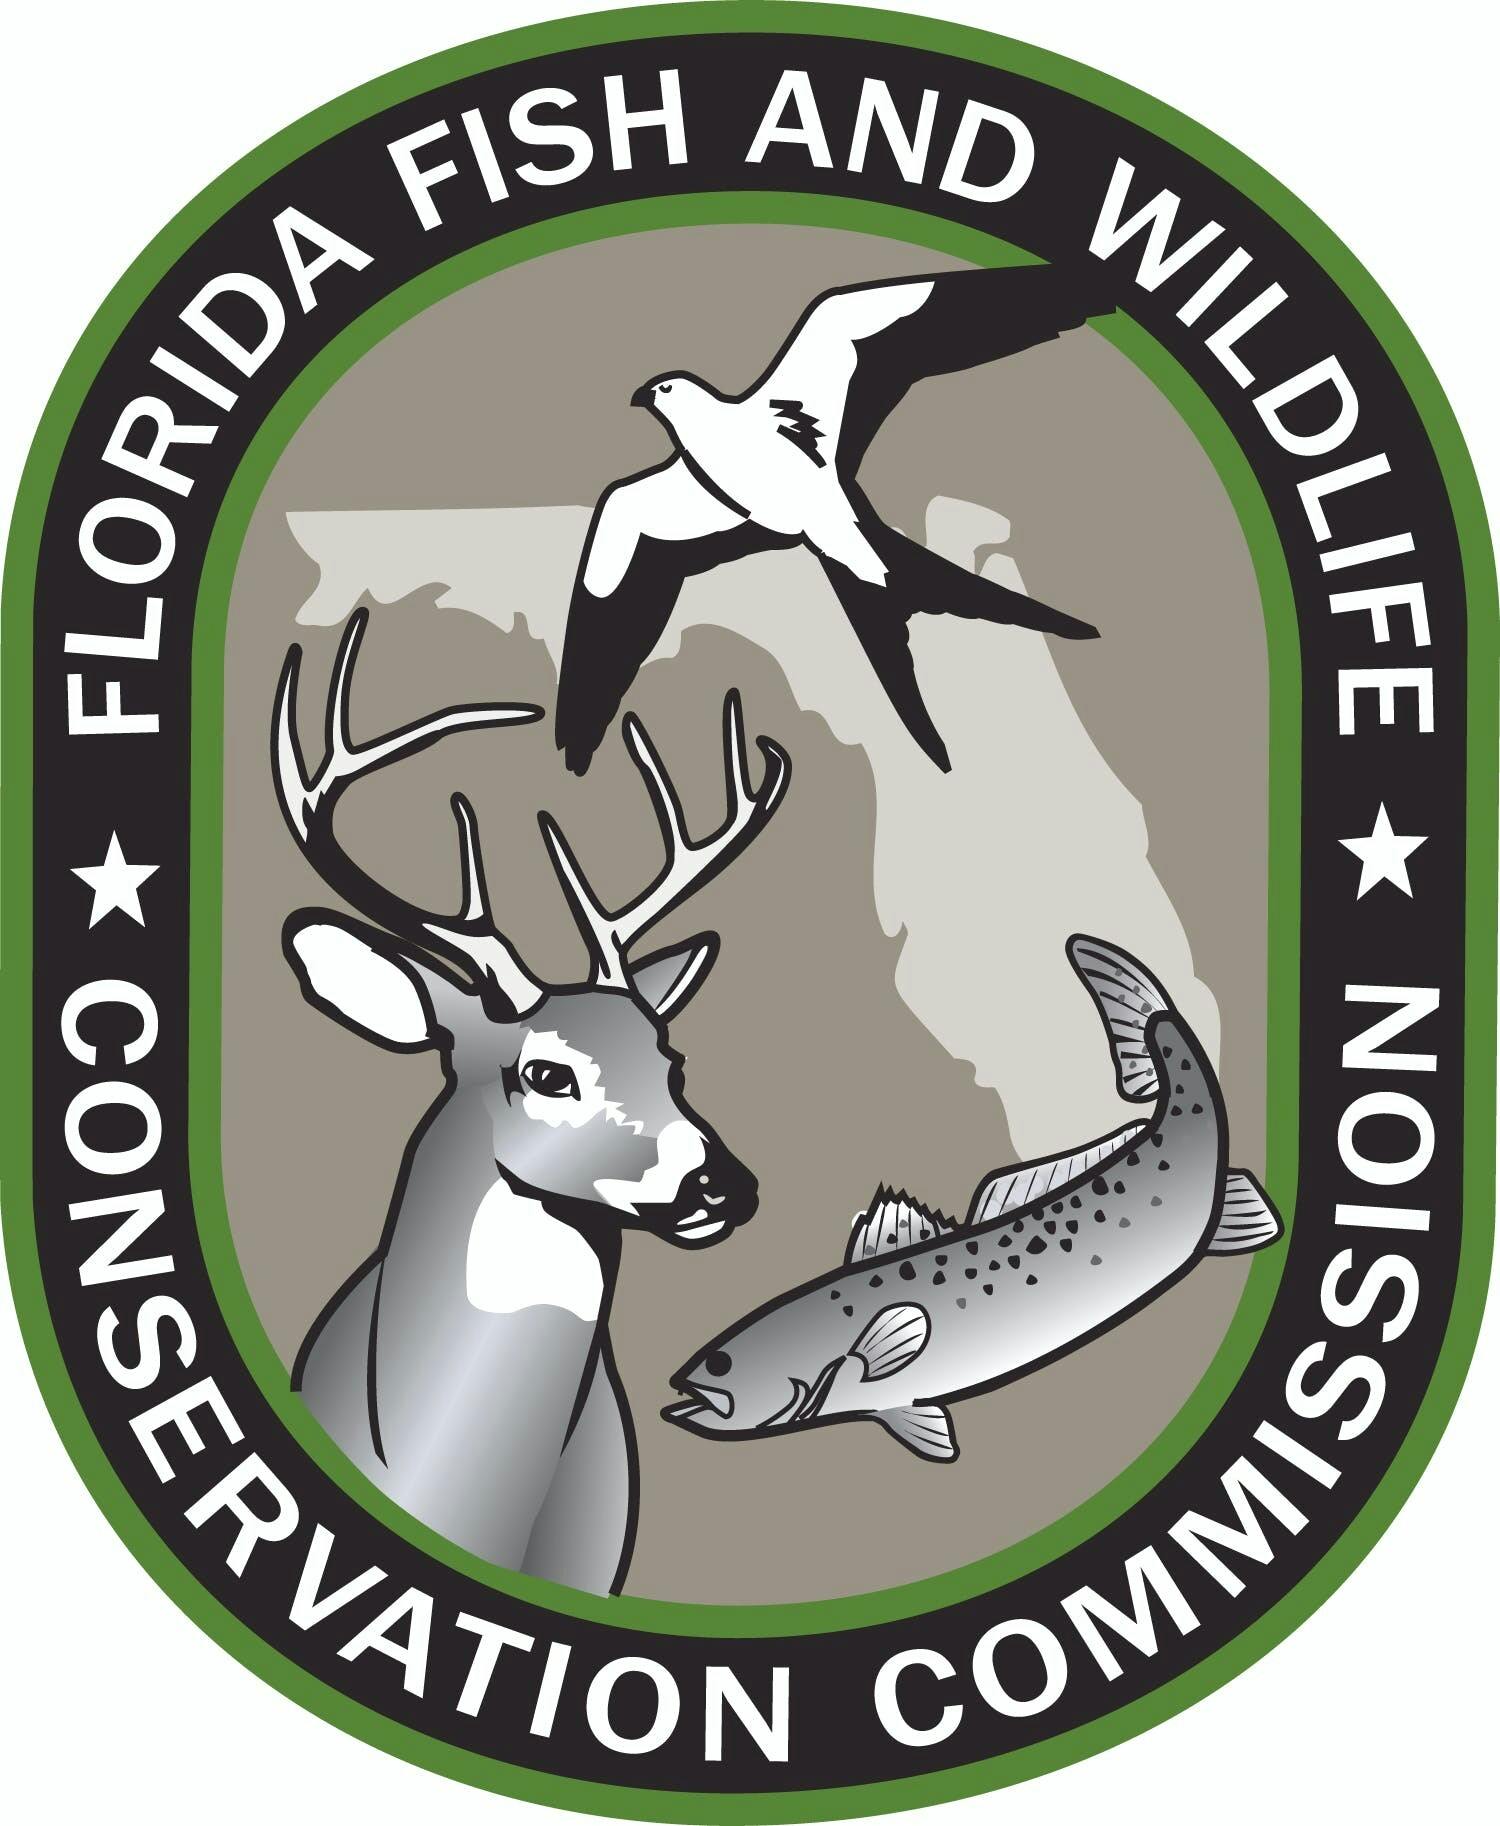 Florida Fish and Wildlife Conservation Commission